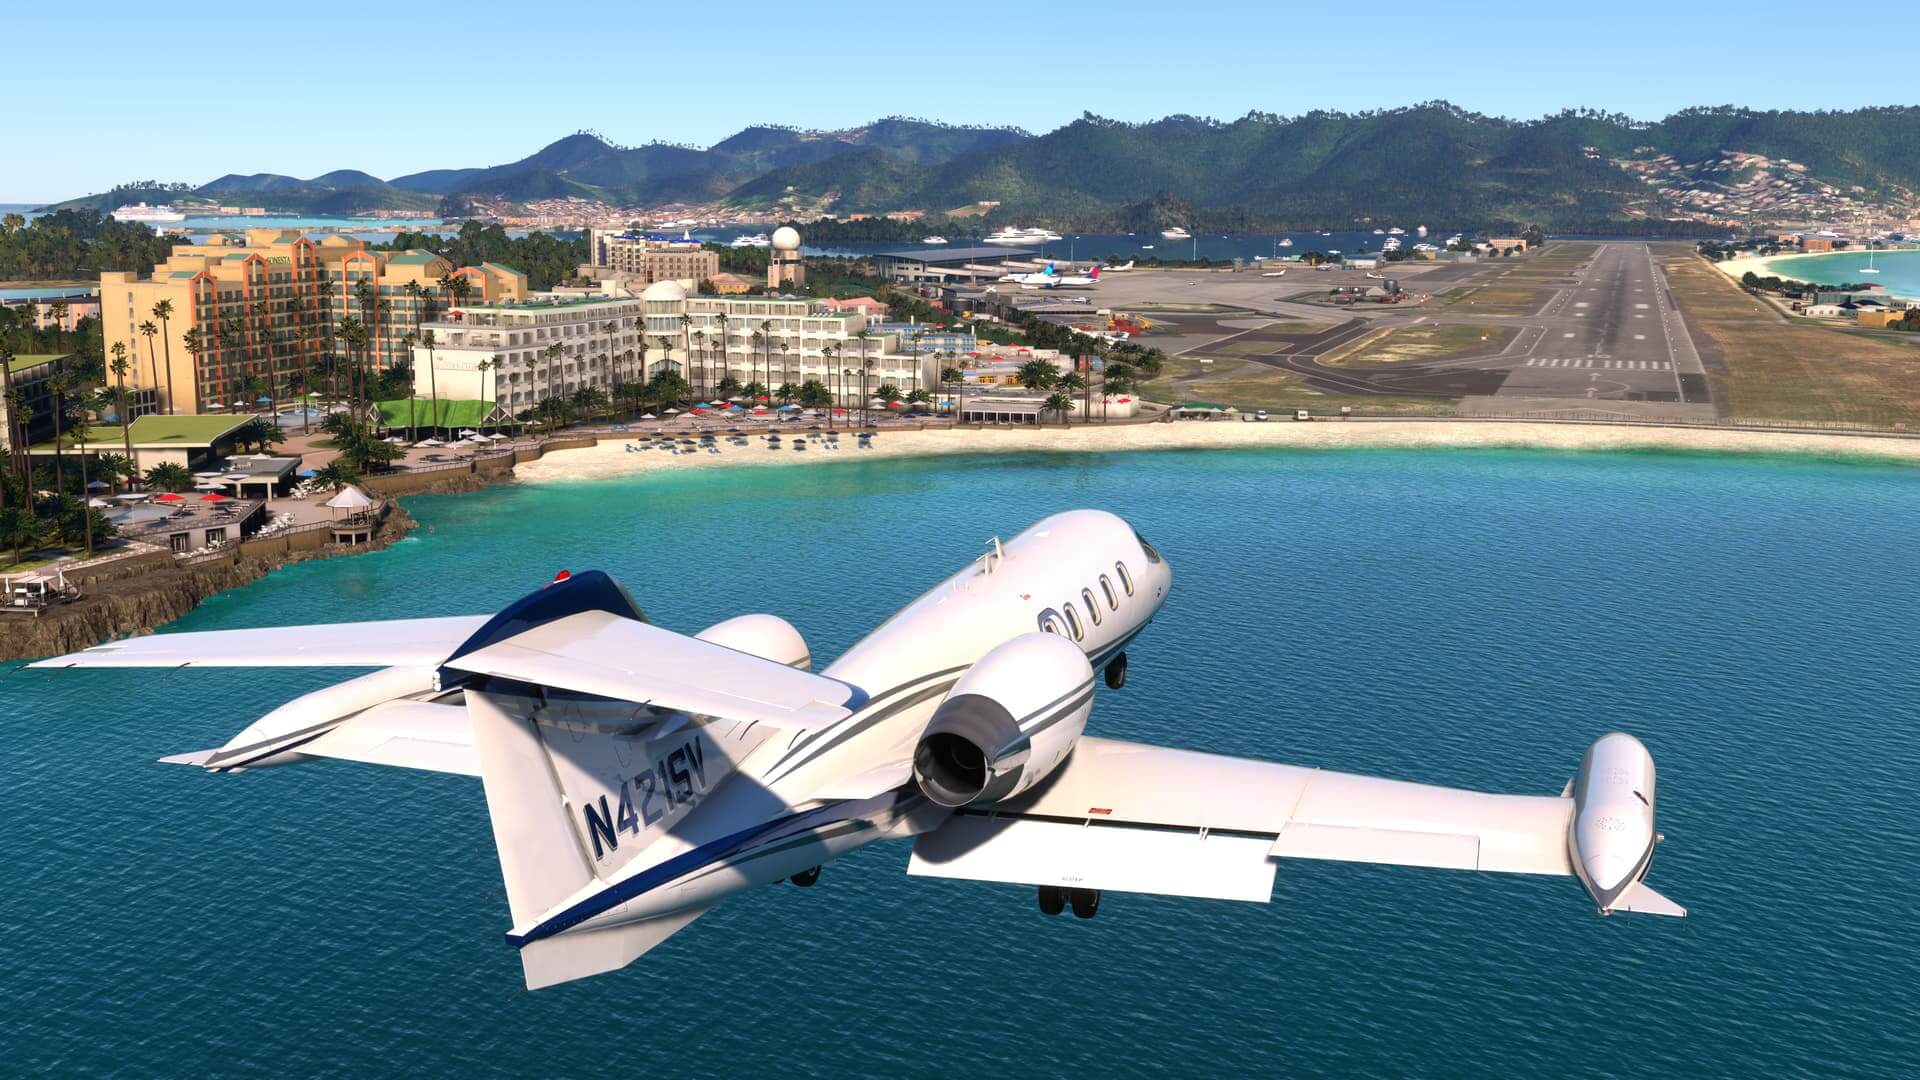 A Learjet on short final to land at Princess Juliana Airport